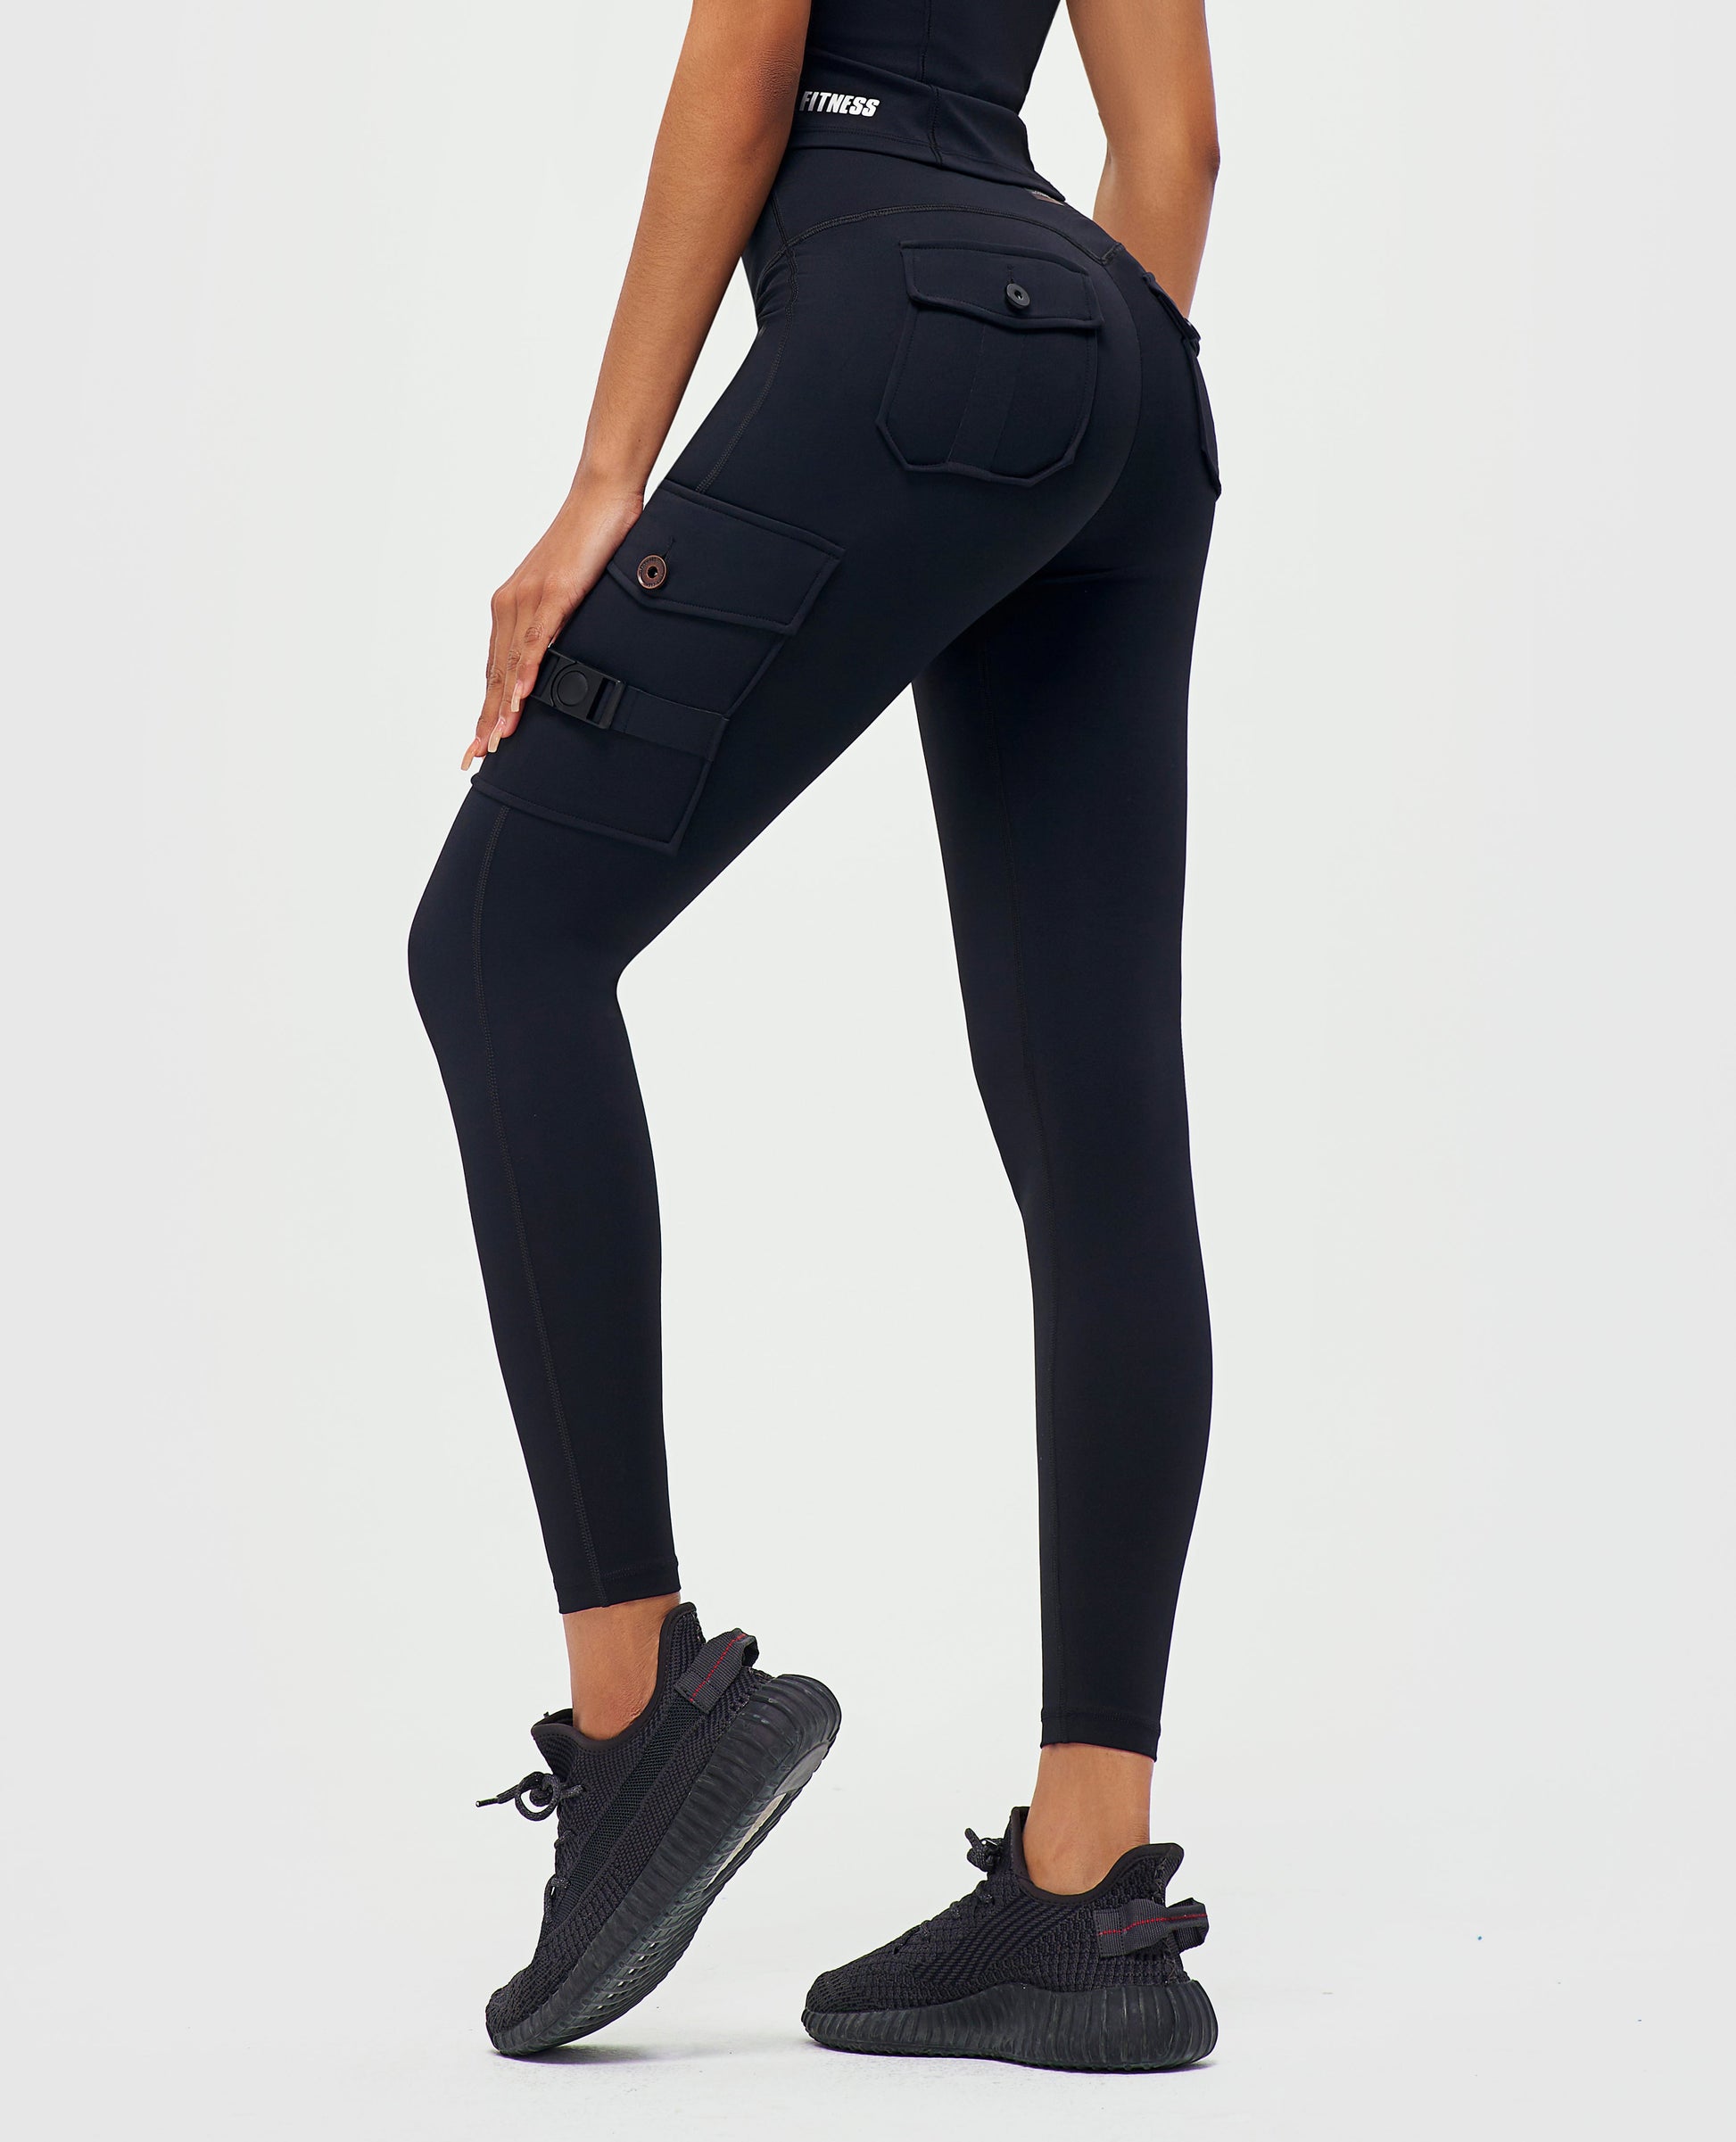 Gym Leggings with Pockets Black, activewear